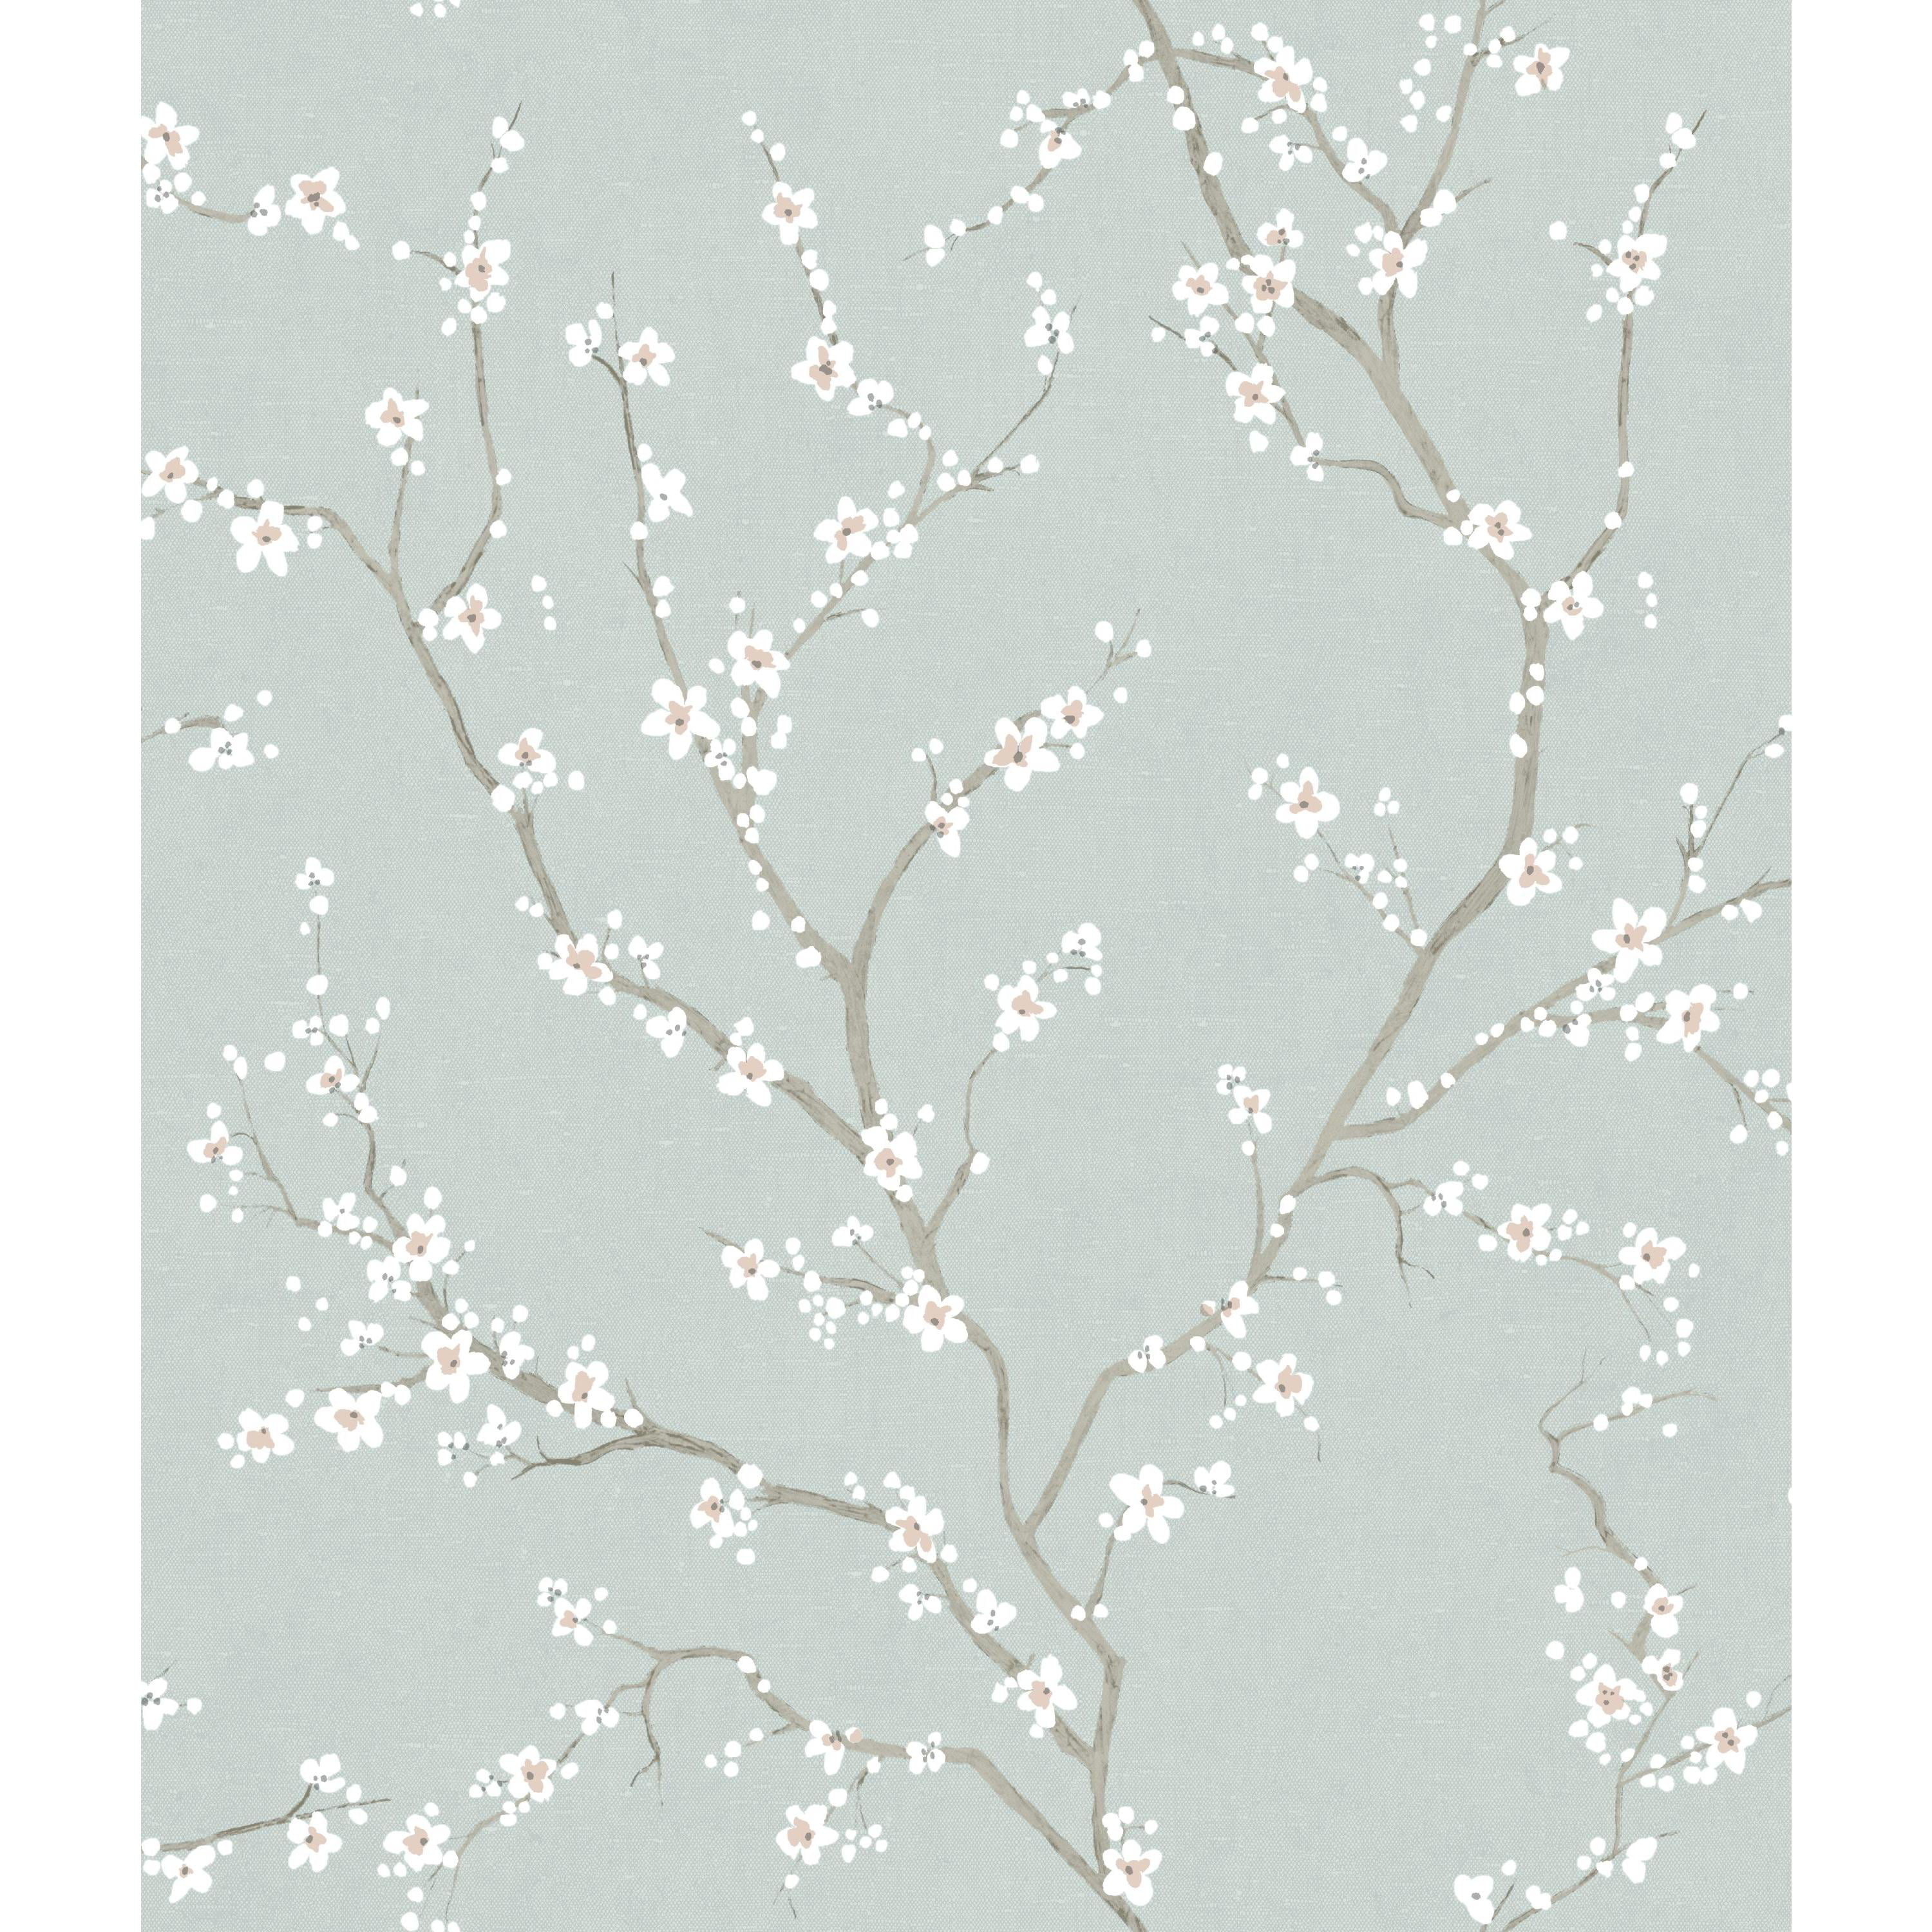 RoomMates Blue Cherry Blossom Floral Peel and Stick Wallpaper - Walmart